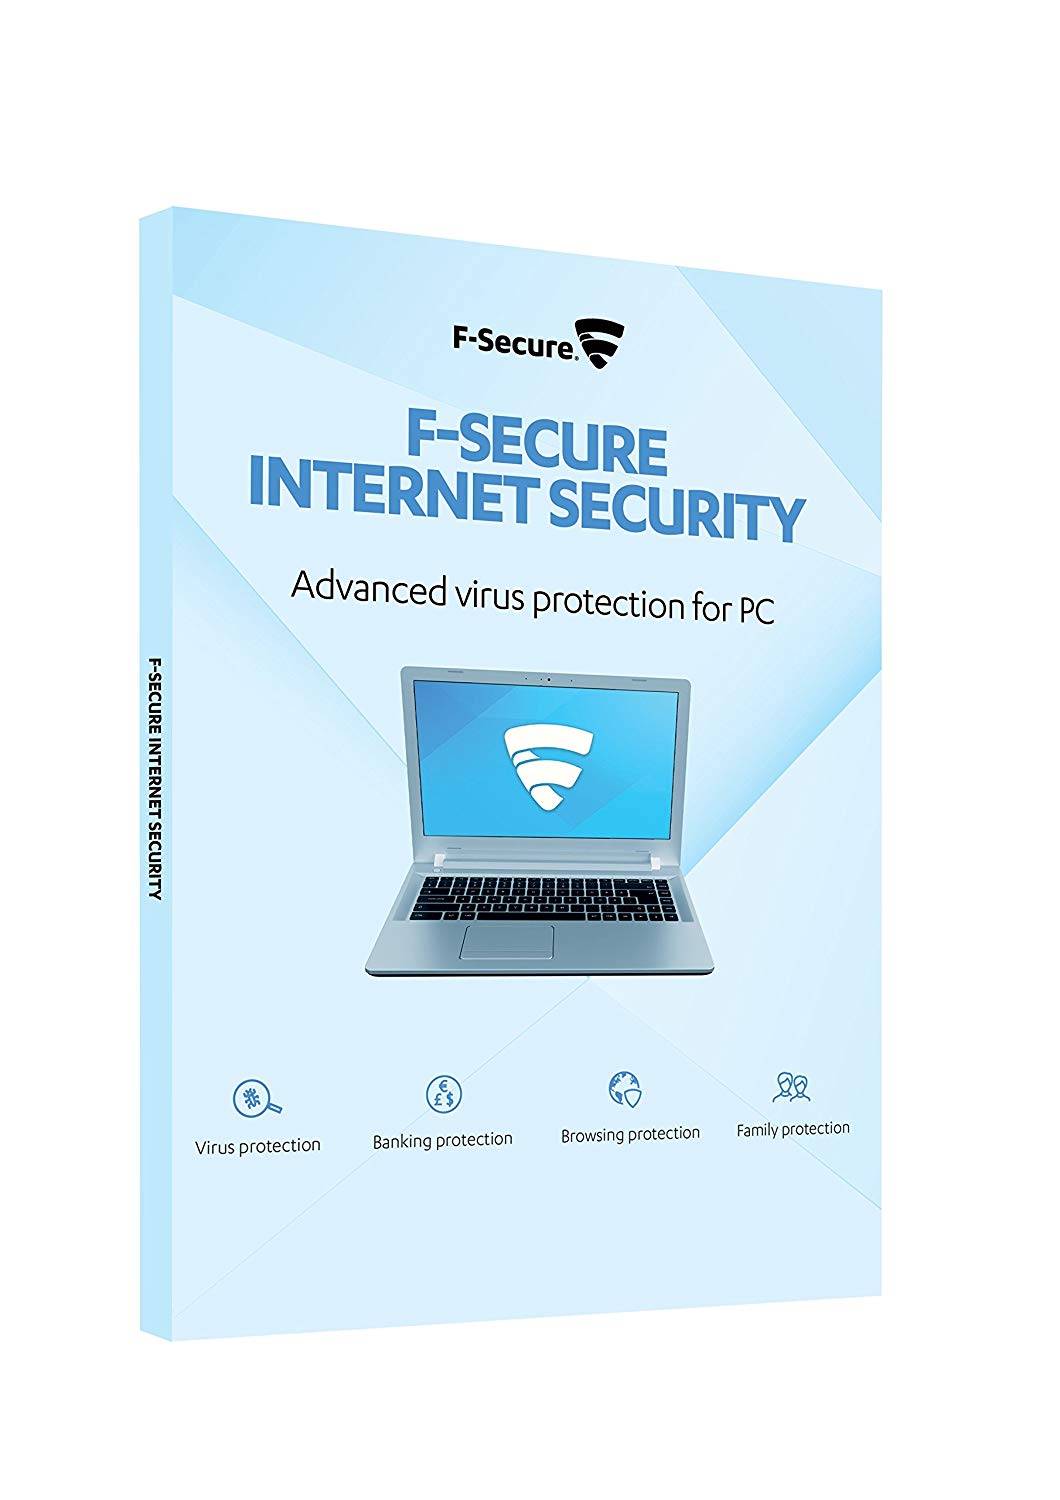 F-Secure Internet Security CD Key (Digital Download) - Various Options Available: Unlimited Devices